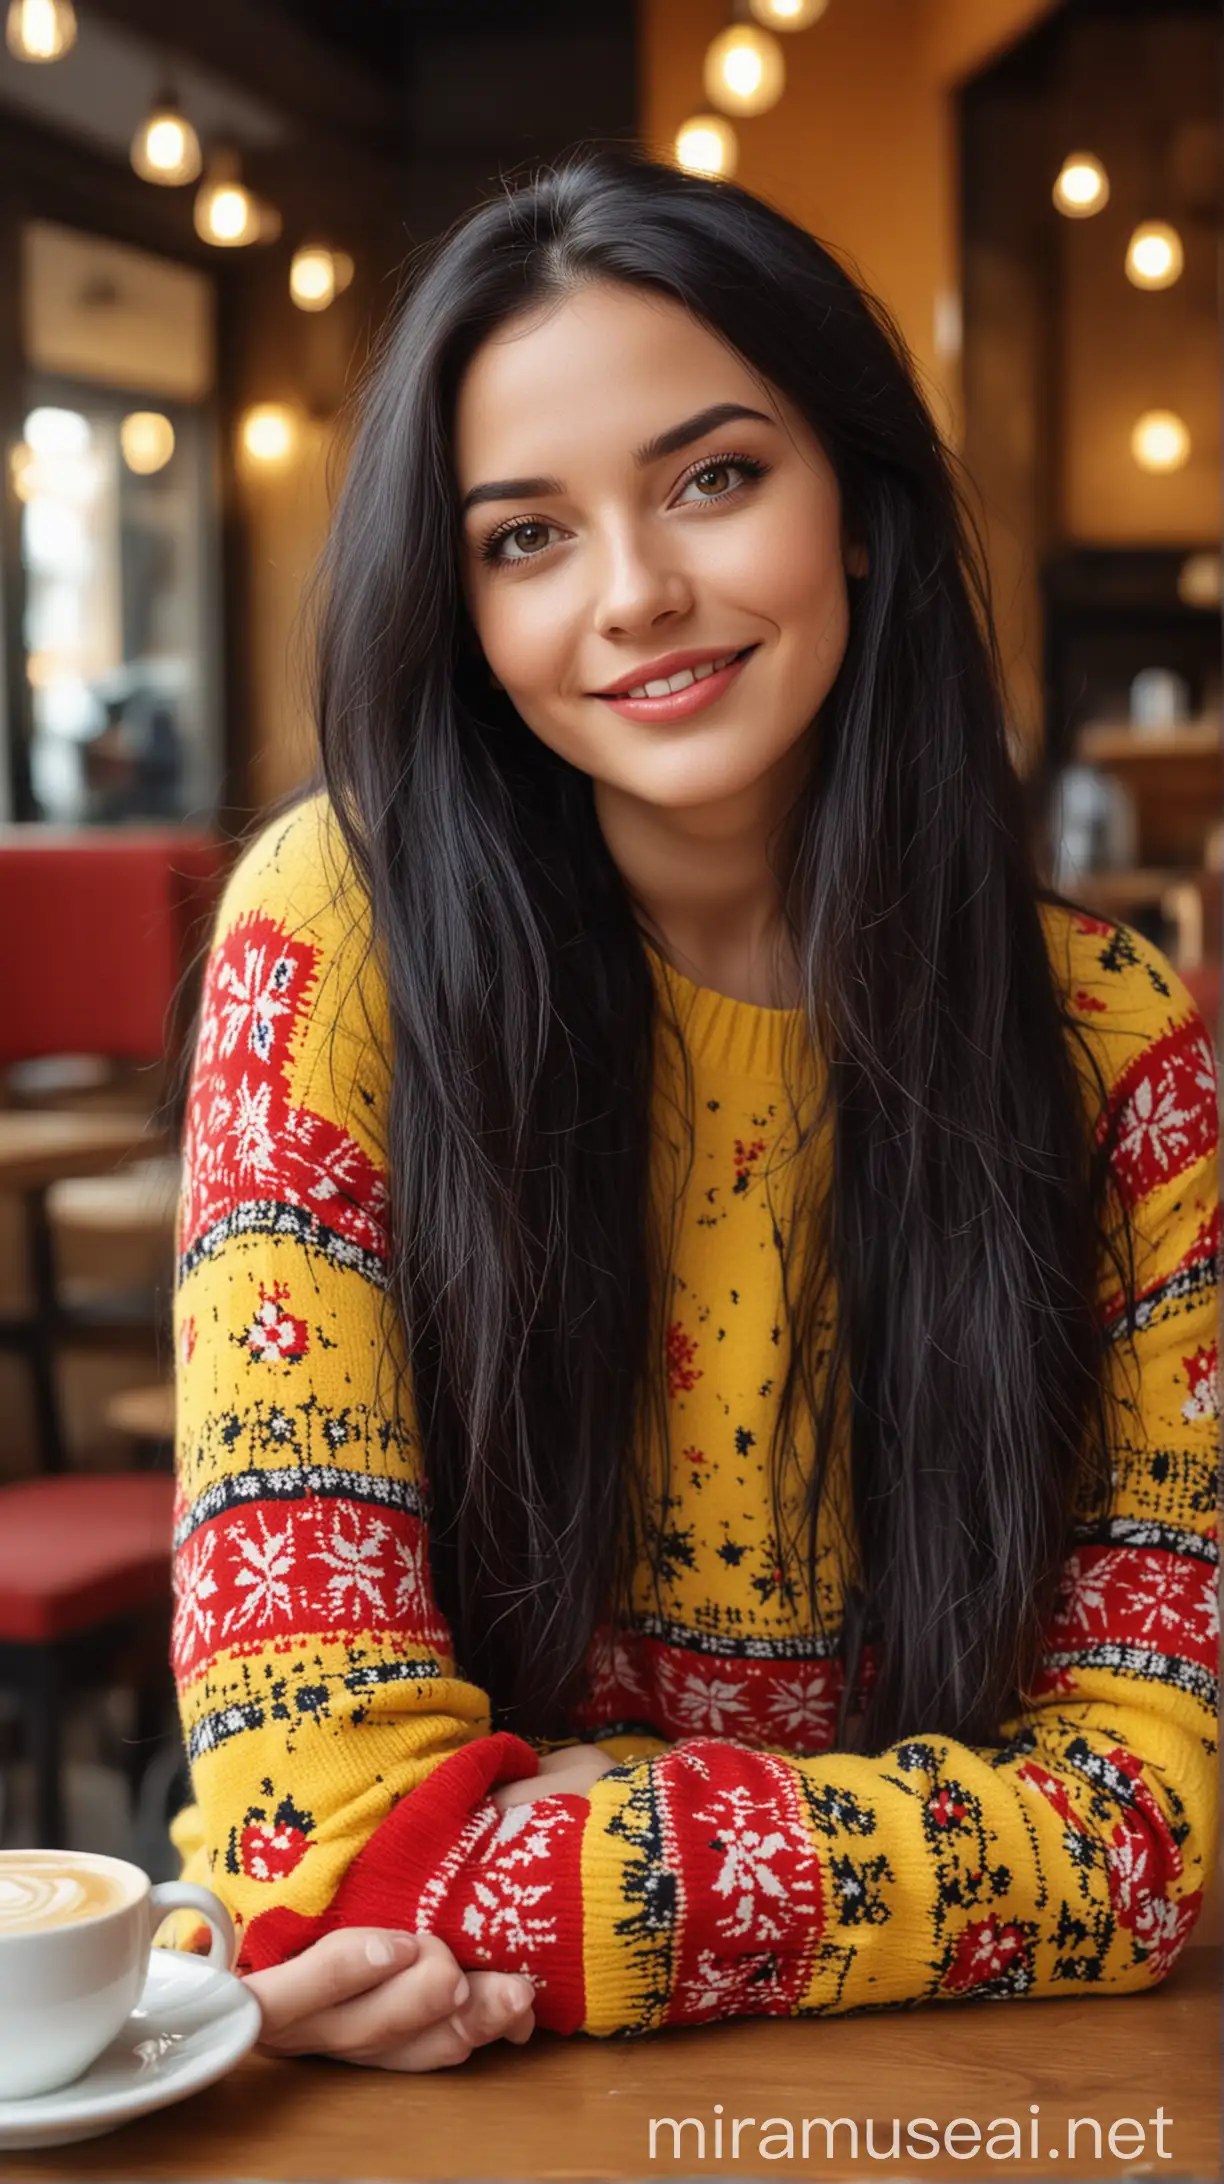 Stylish Woman in Vibrant Caf Setting Beautiful LongHaired Woman in Bold Sweater